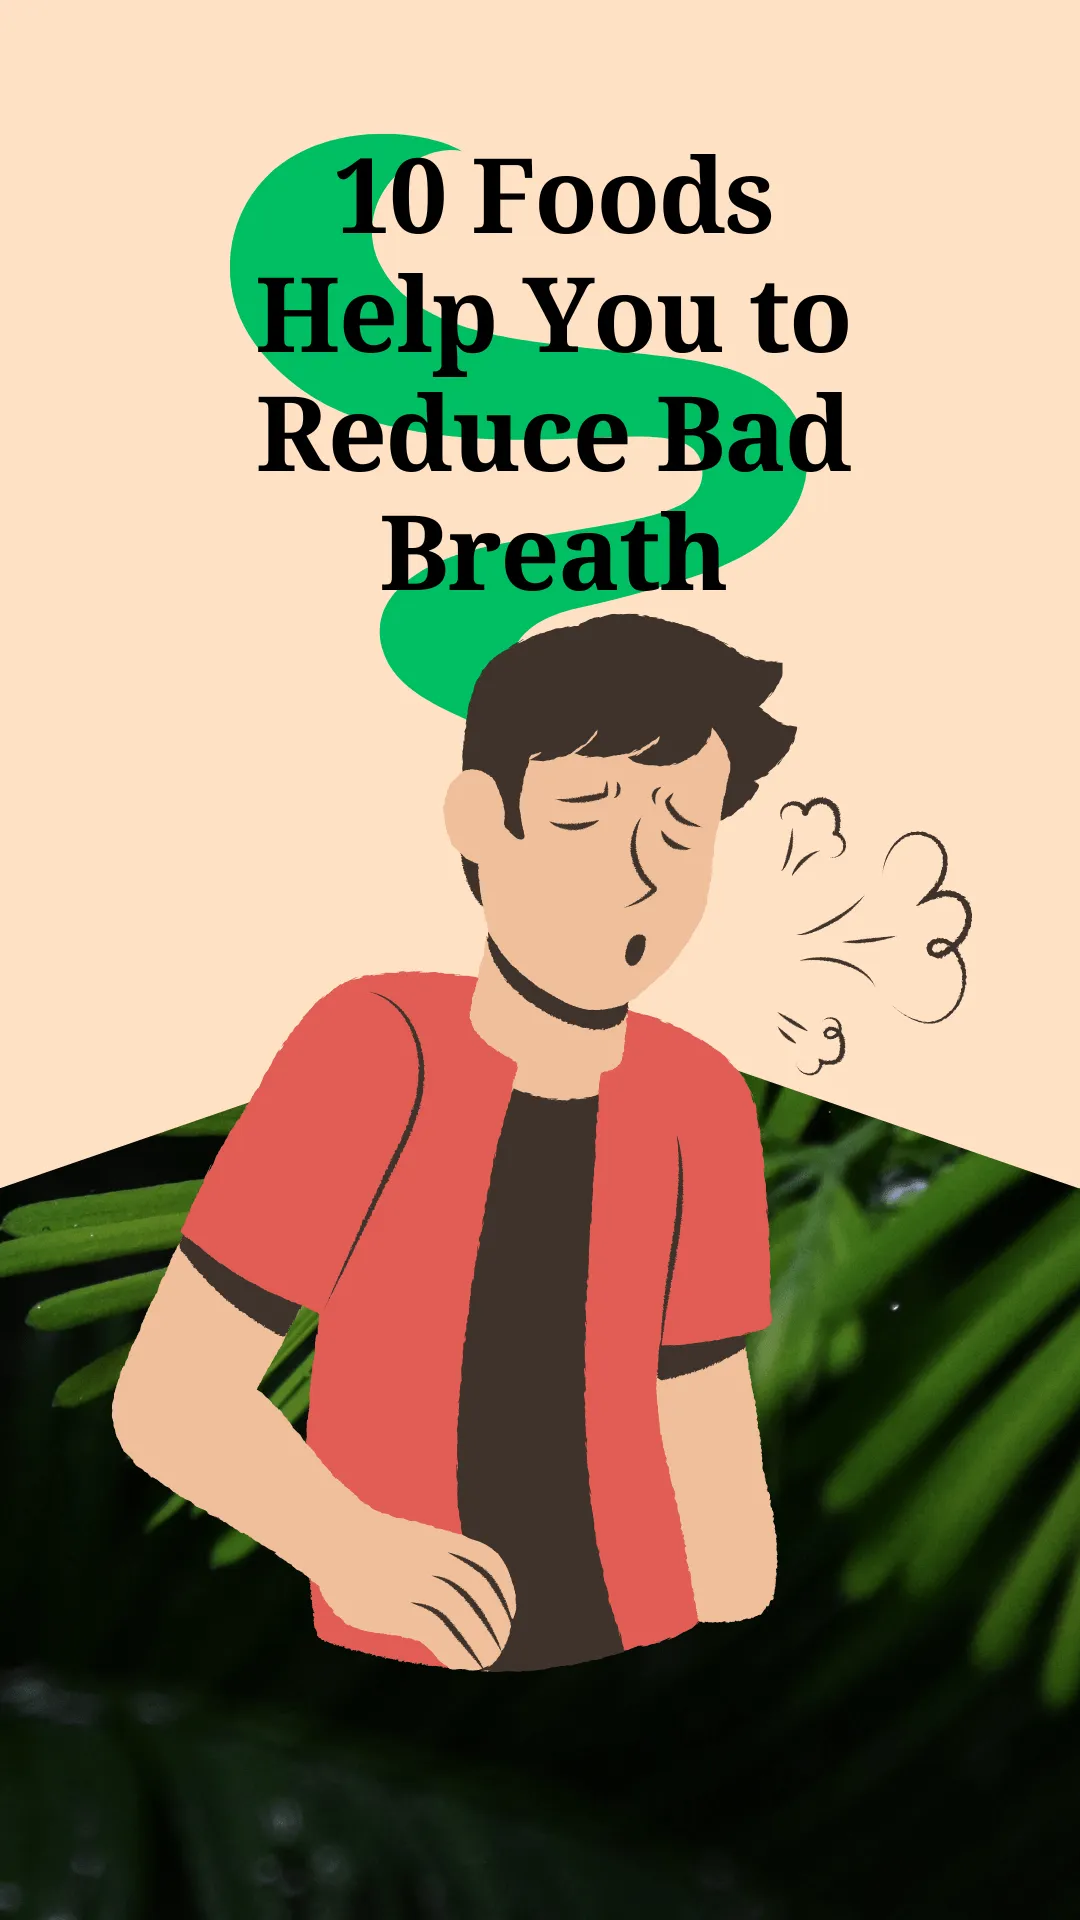 10 Foods Help You to Reduce Bad Breath